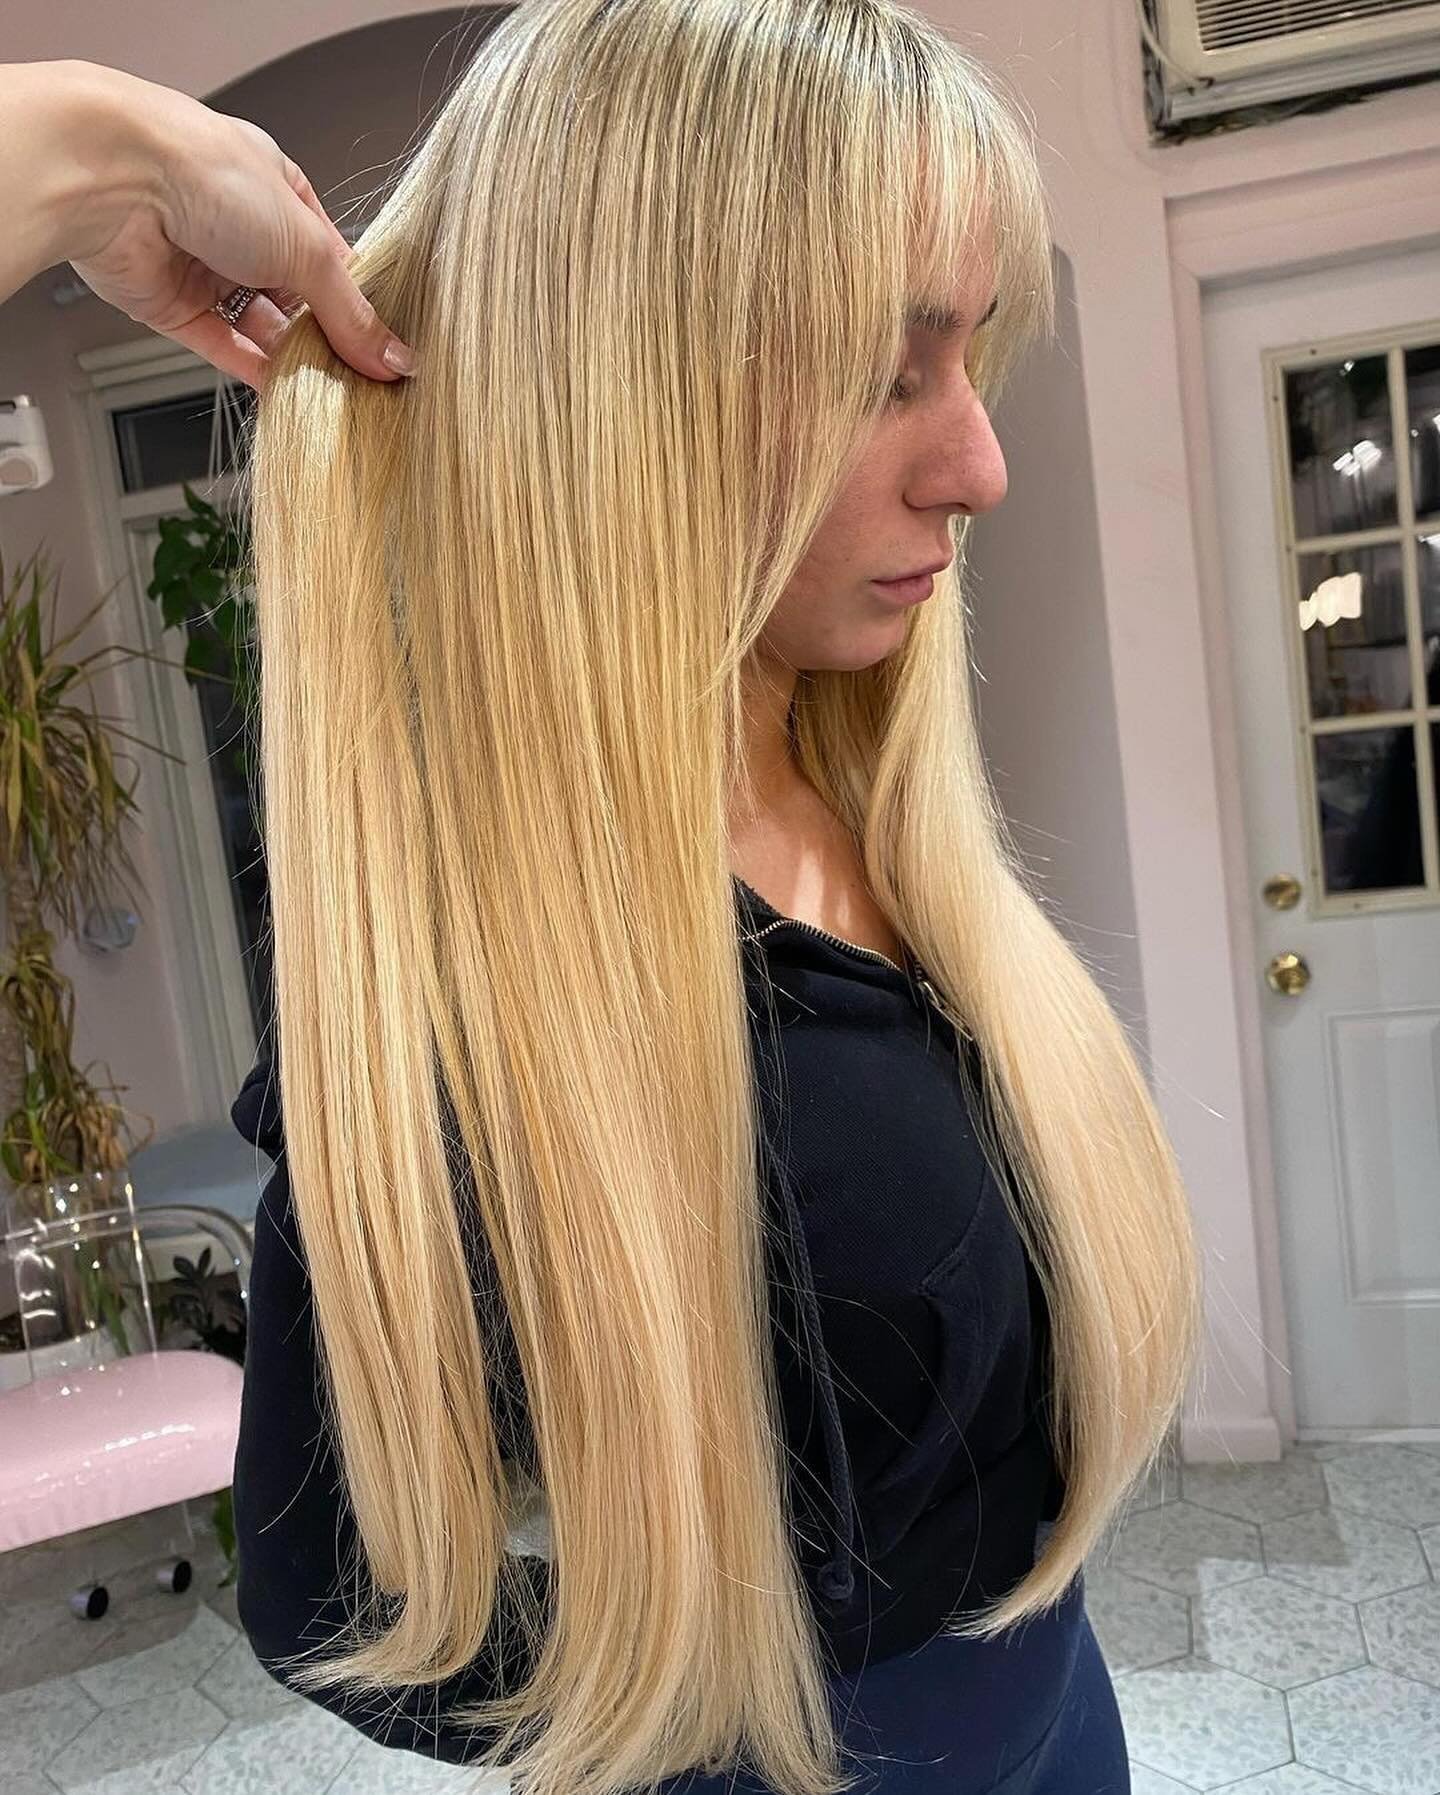 Swish, swish! 🌟 Just waved goodbye to tape-ins and said hello to the magic of beaded weft extensions by the one and only Lauren @laurens.hairstyling ! 💇&zwj;♀️✨ Get ready for a game-changing mane makeover&mdash;move-ups are a breeze (no sticky situ